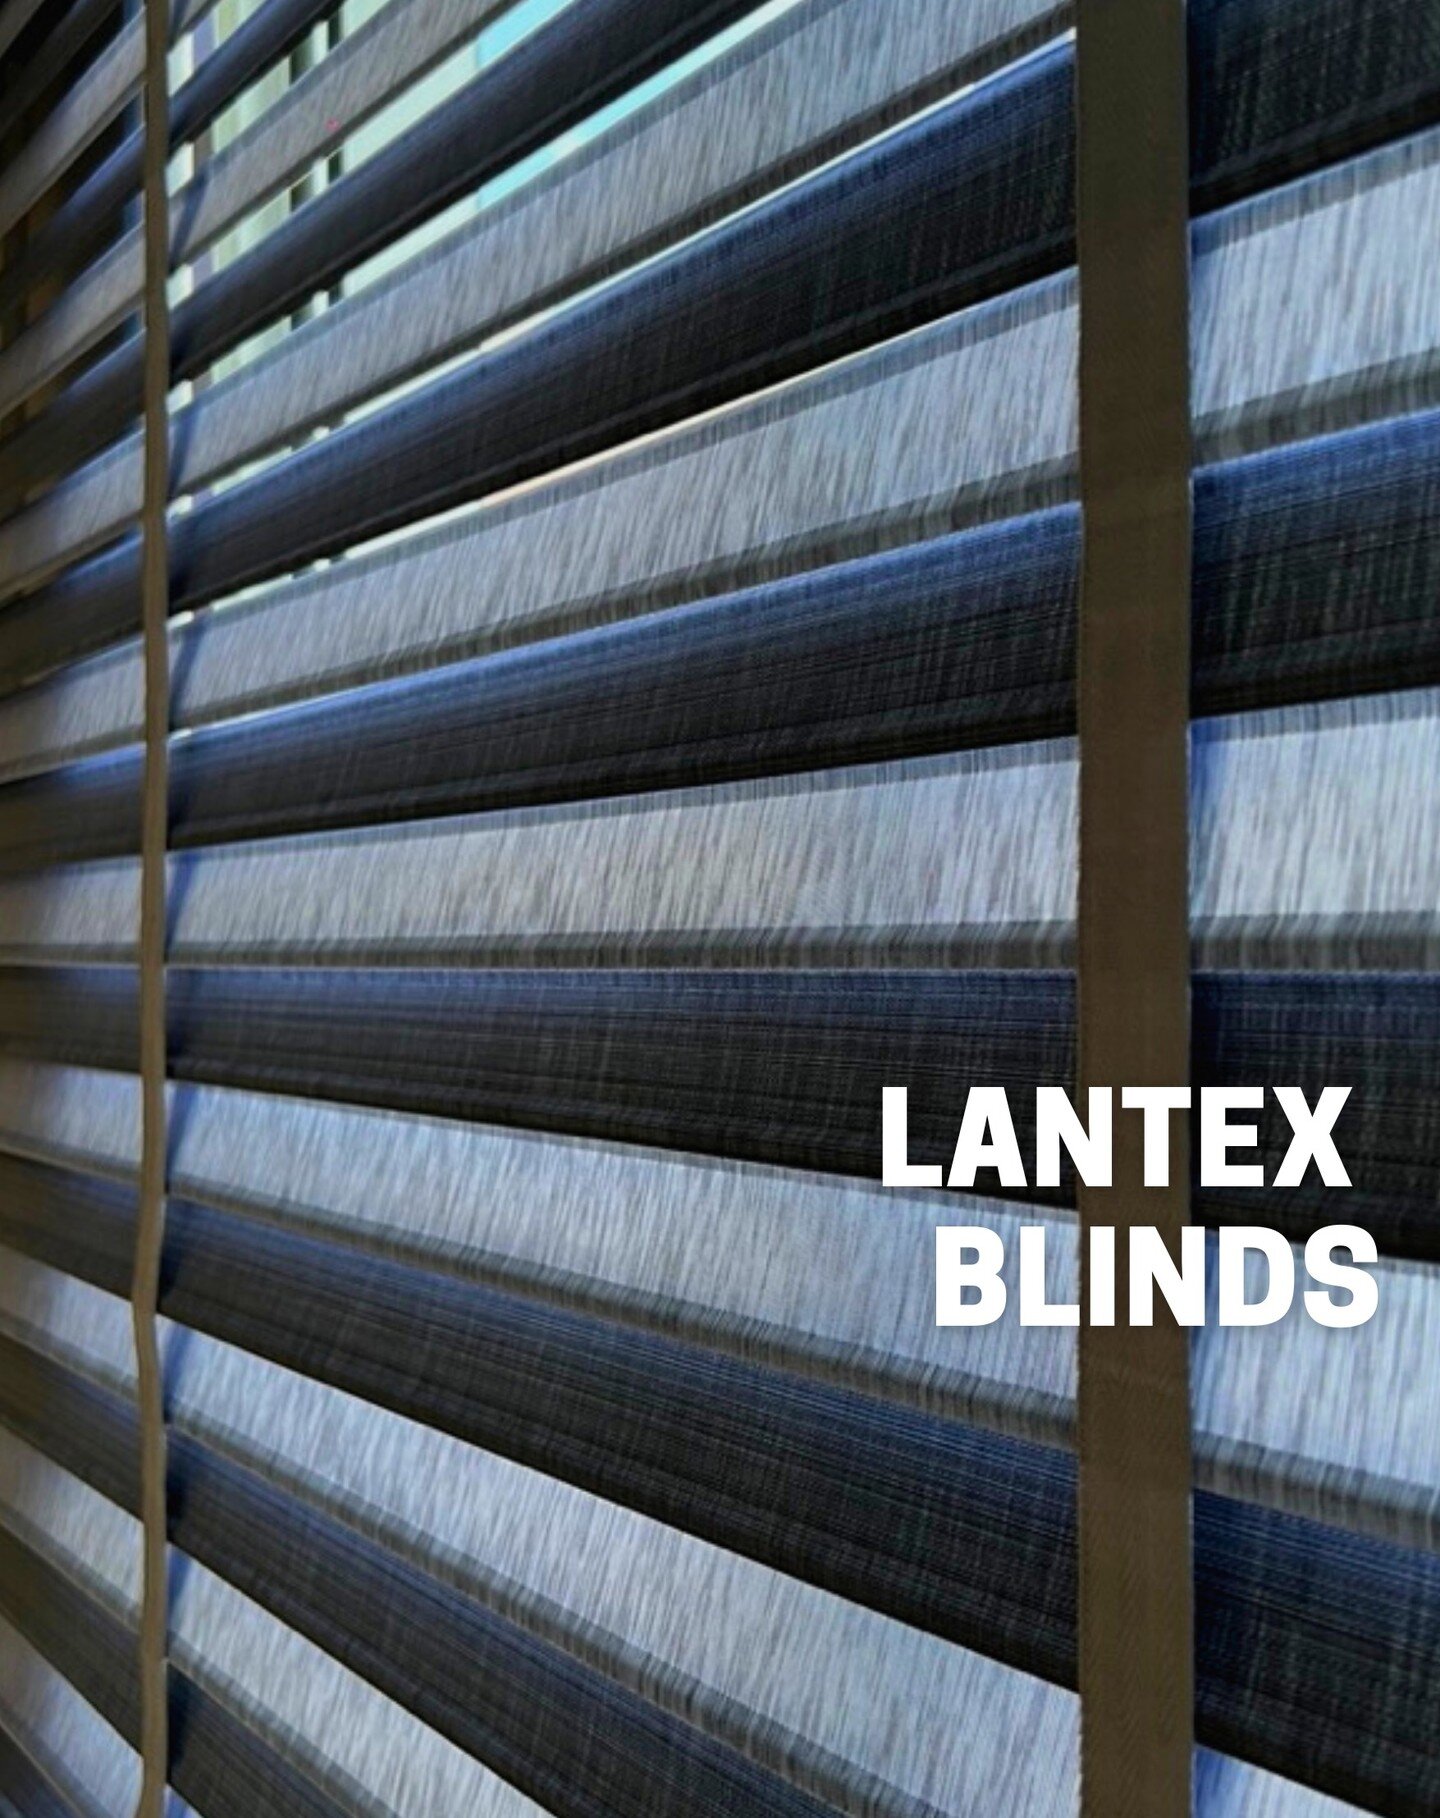 Lantex slat is made up of 100% polyester and has no harmful substances, refusing any pollution in decoration. Lantex slat is light enough for making high-riser and huge width motor blinds. It is up to international standards in age-resistance and col